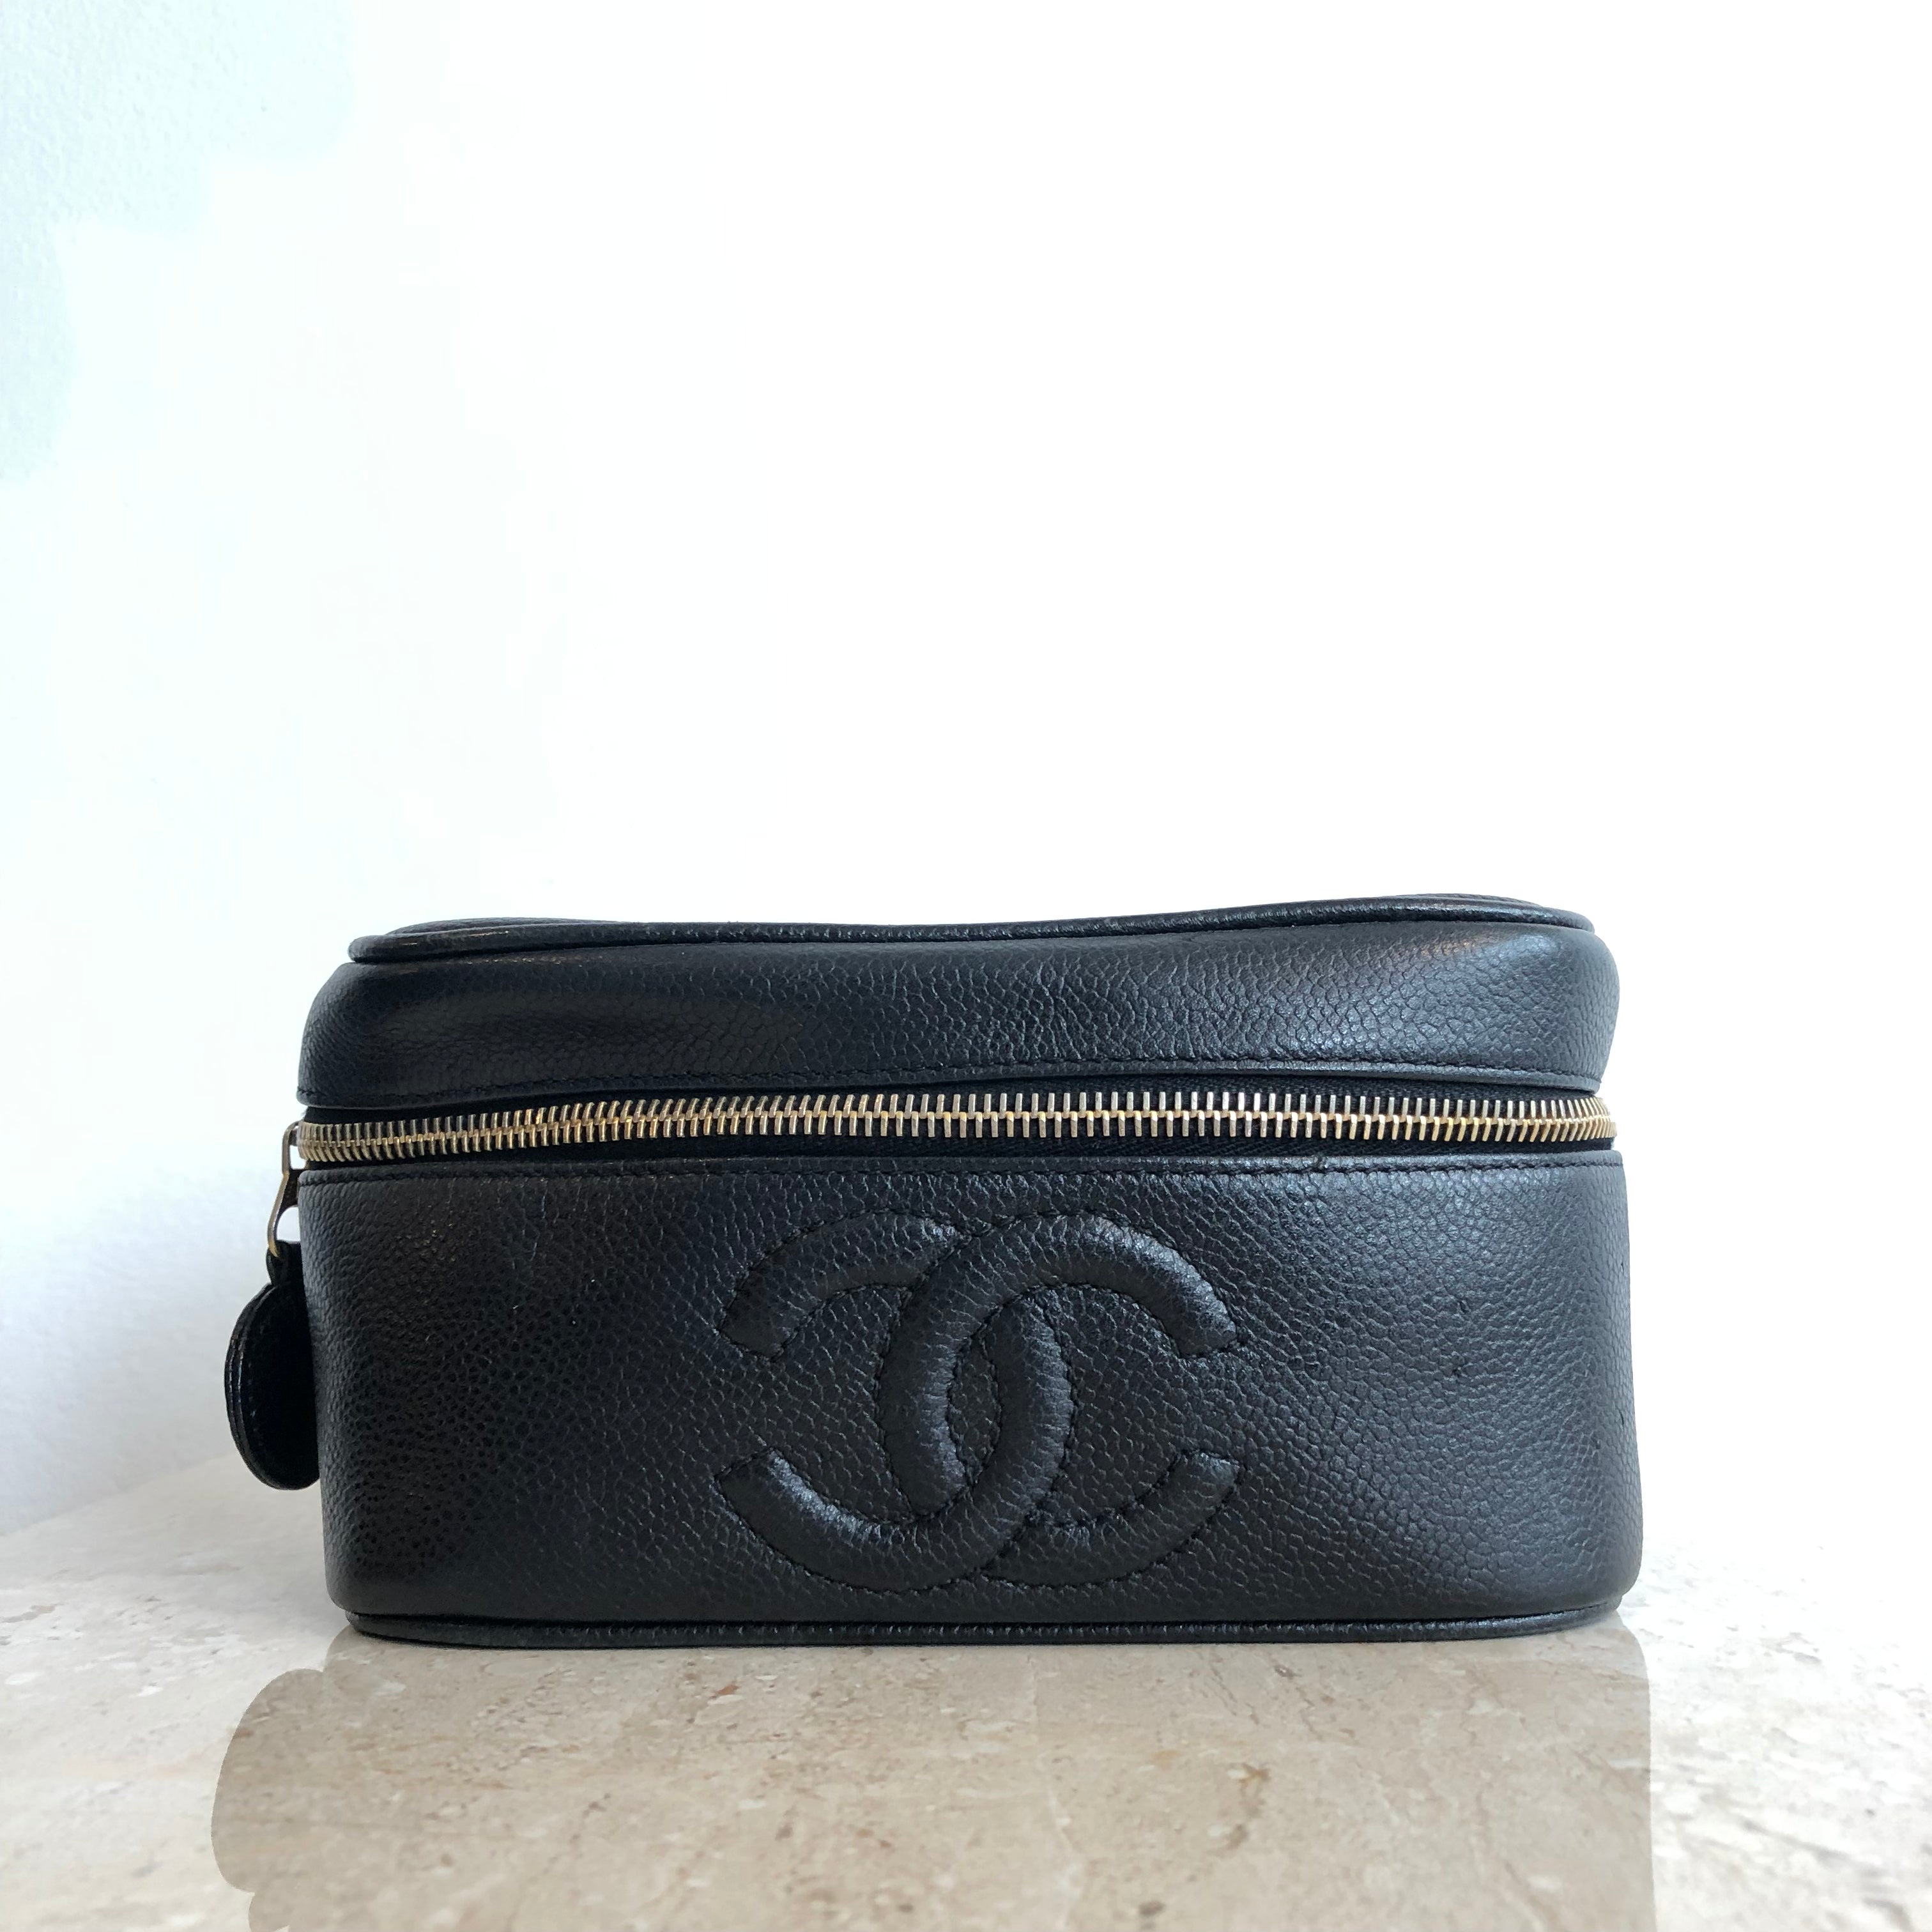 Vintage Chanel Vanity Heart Mirror Bag Black Patent Gold Hardware  Madison  Avenue Couture